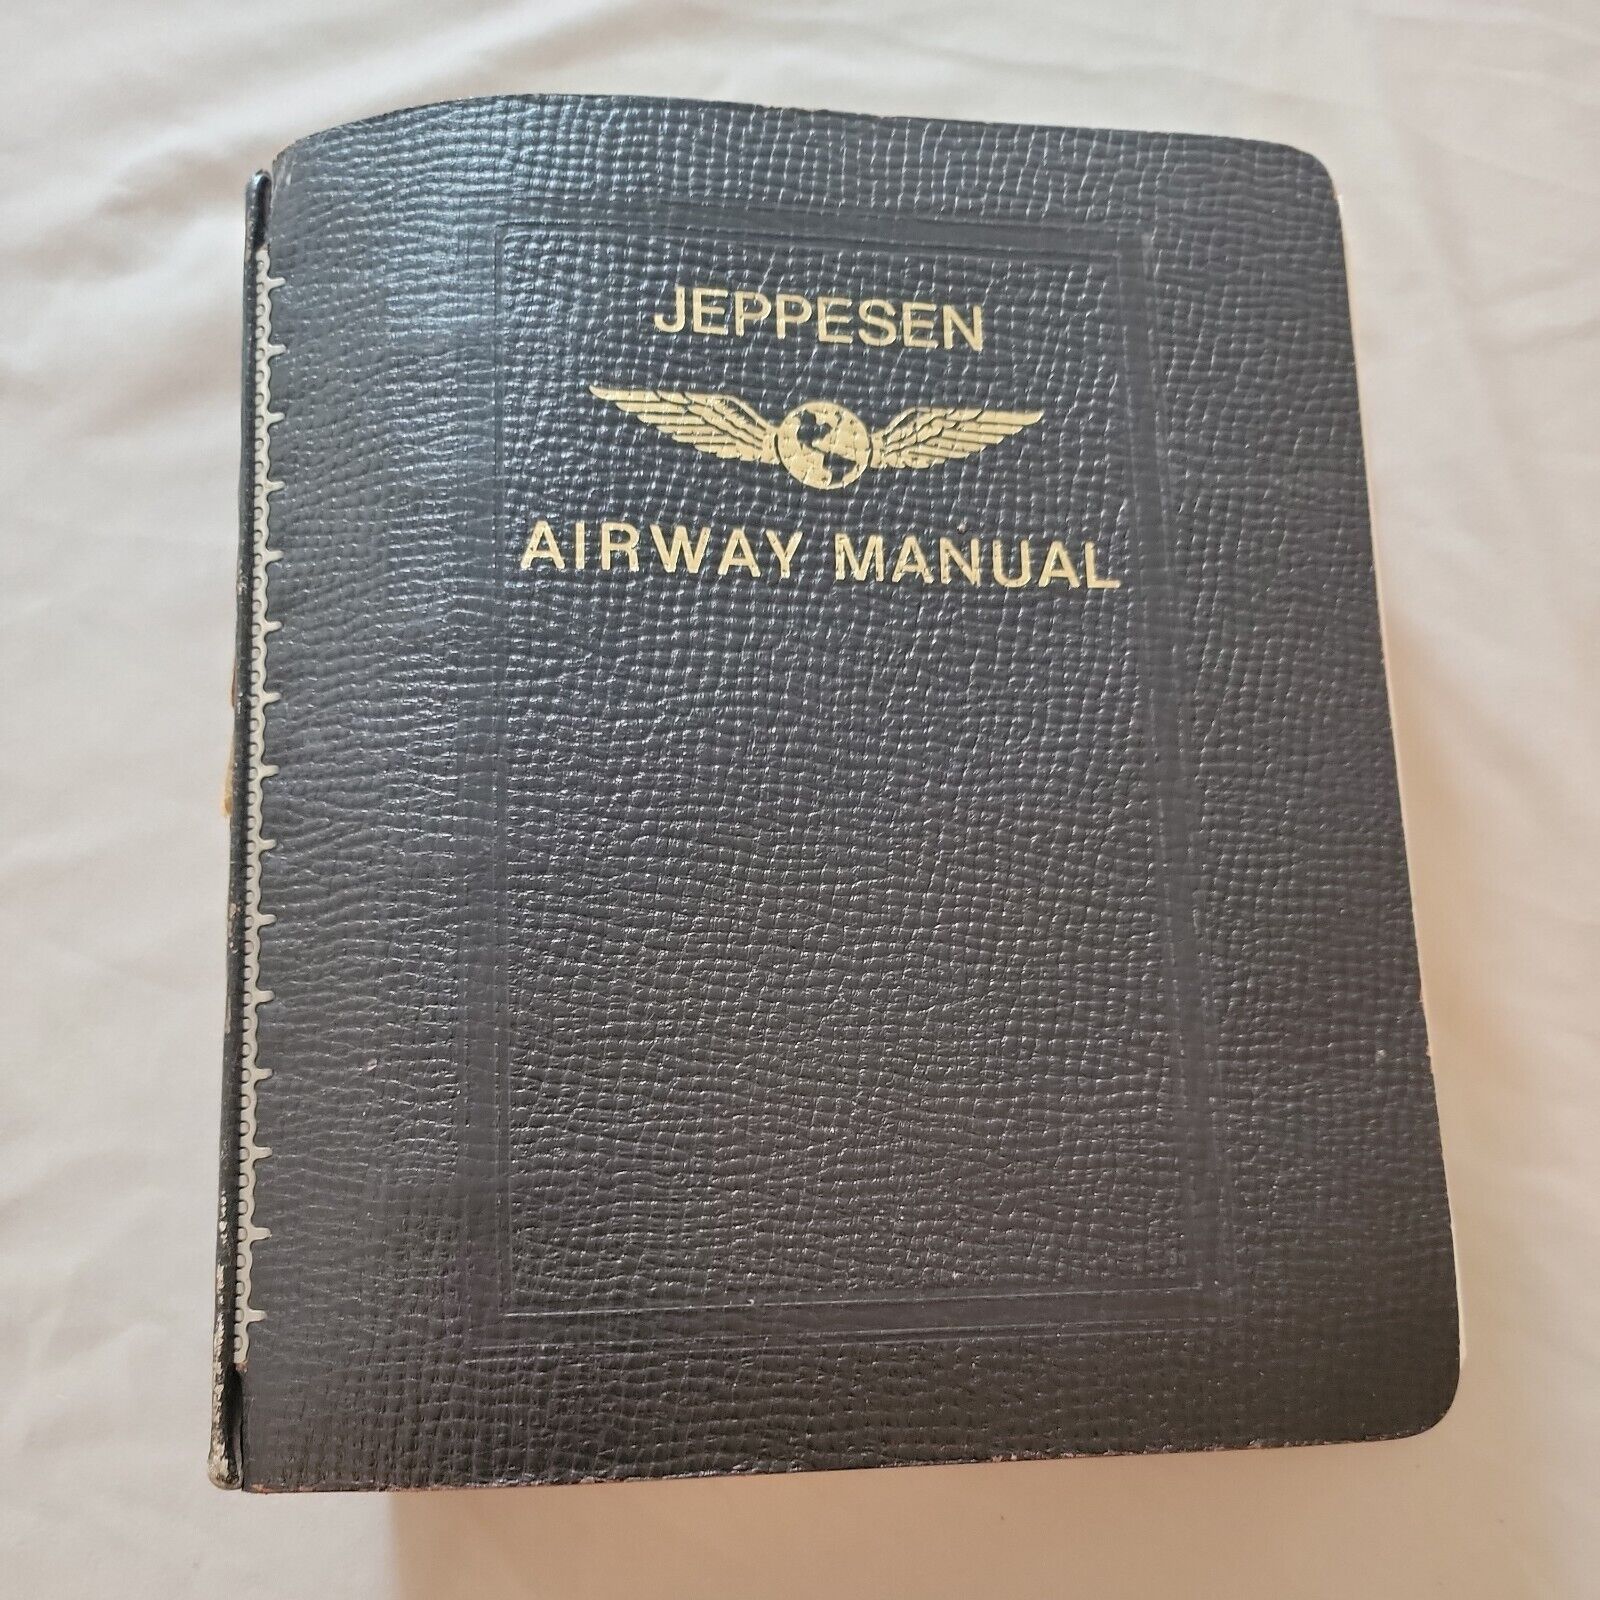 Jeppesen Airway Manual Vintage Eastern Canada Trip Kit CAE04 Full of Maps Charts